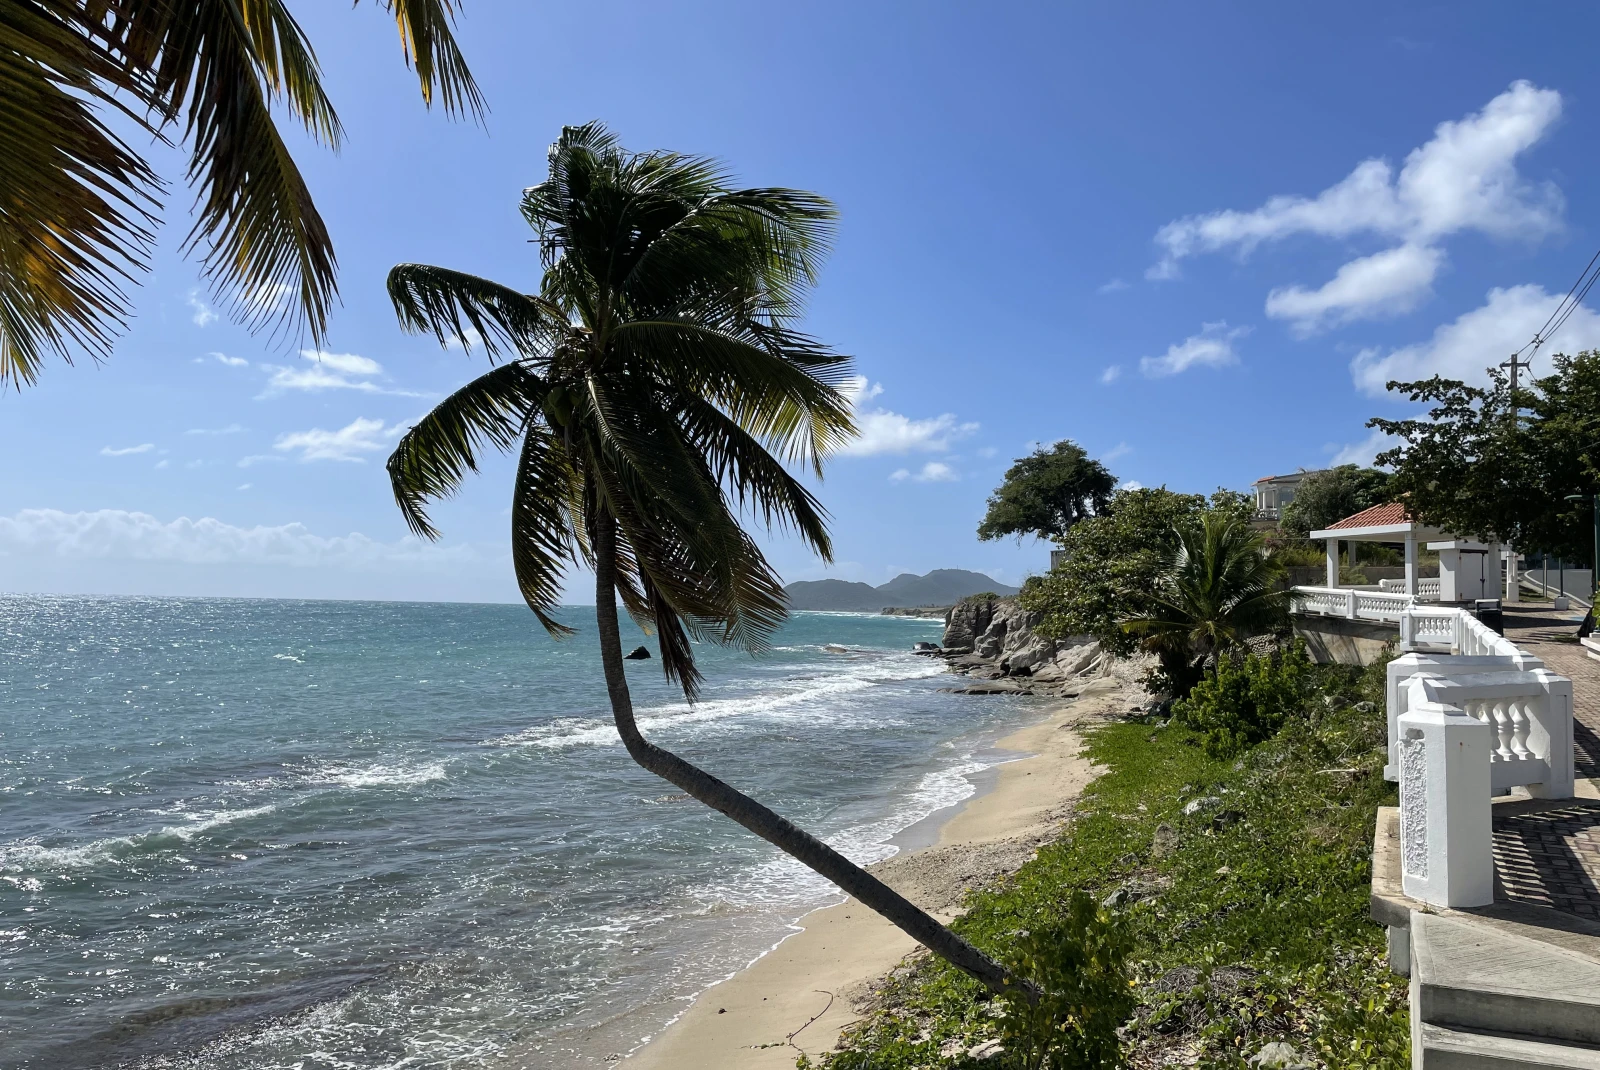 View of the ocean and beach with palm trees during daytime